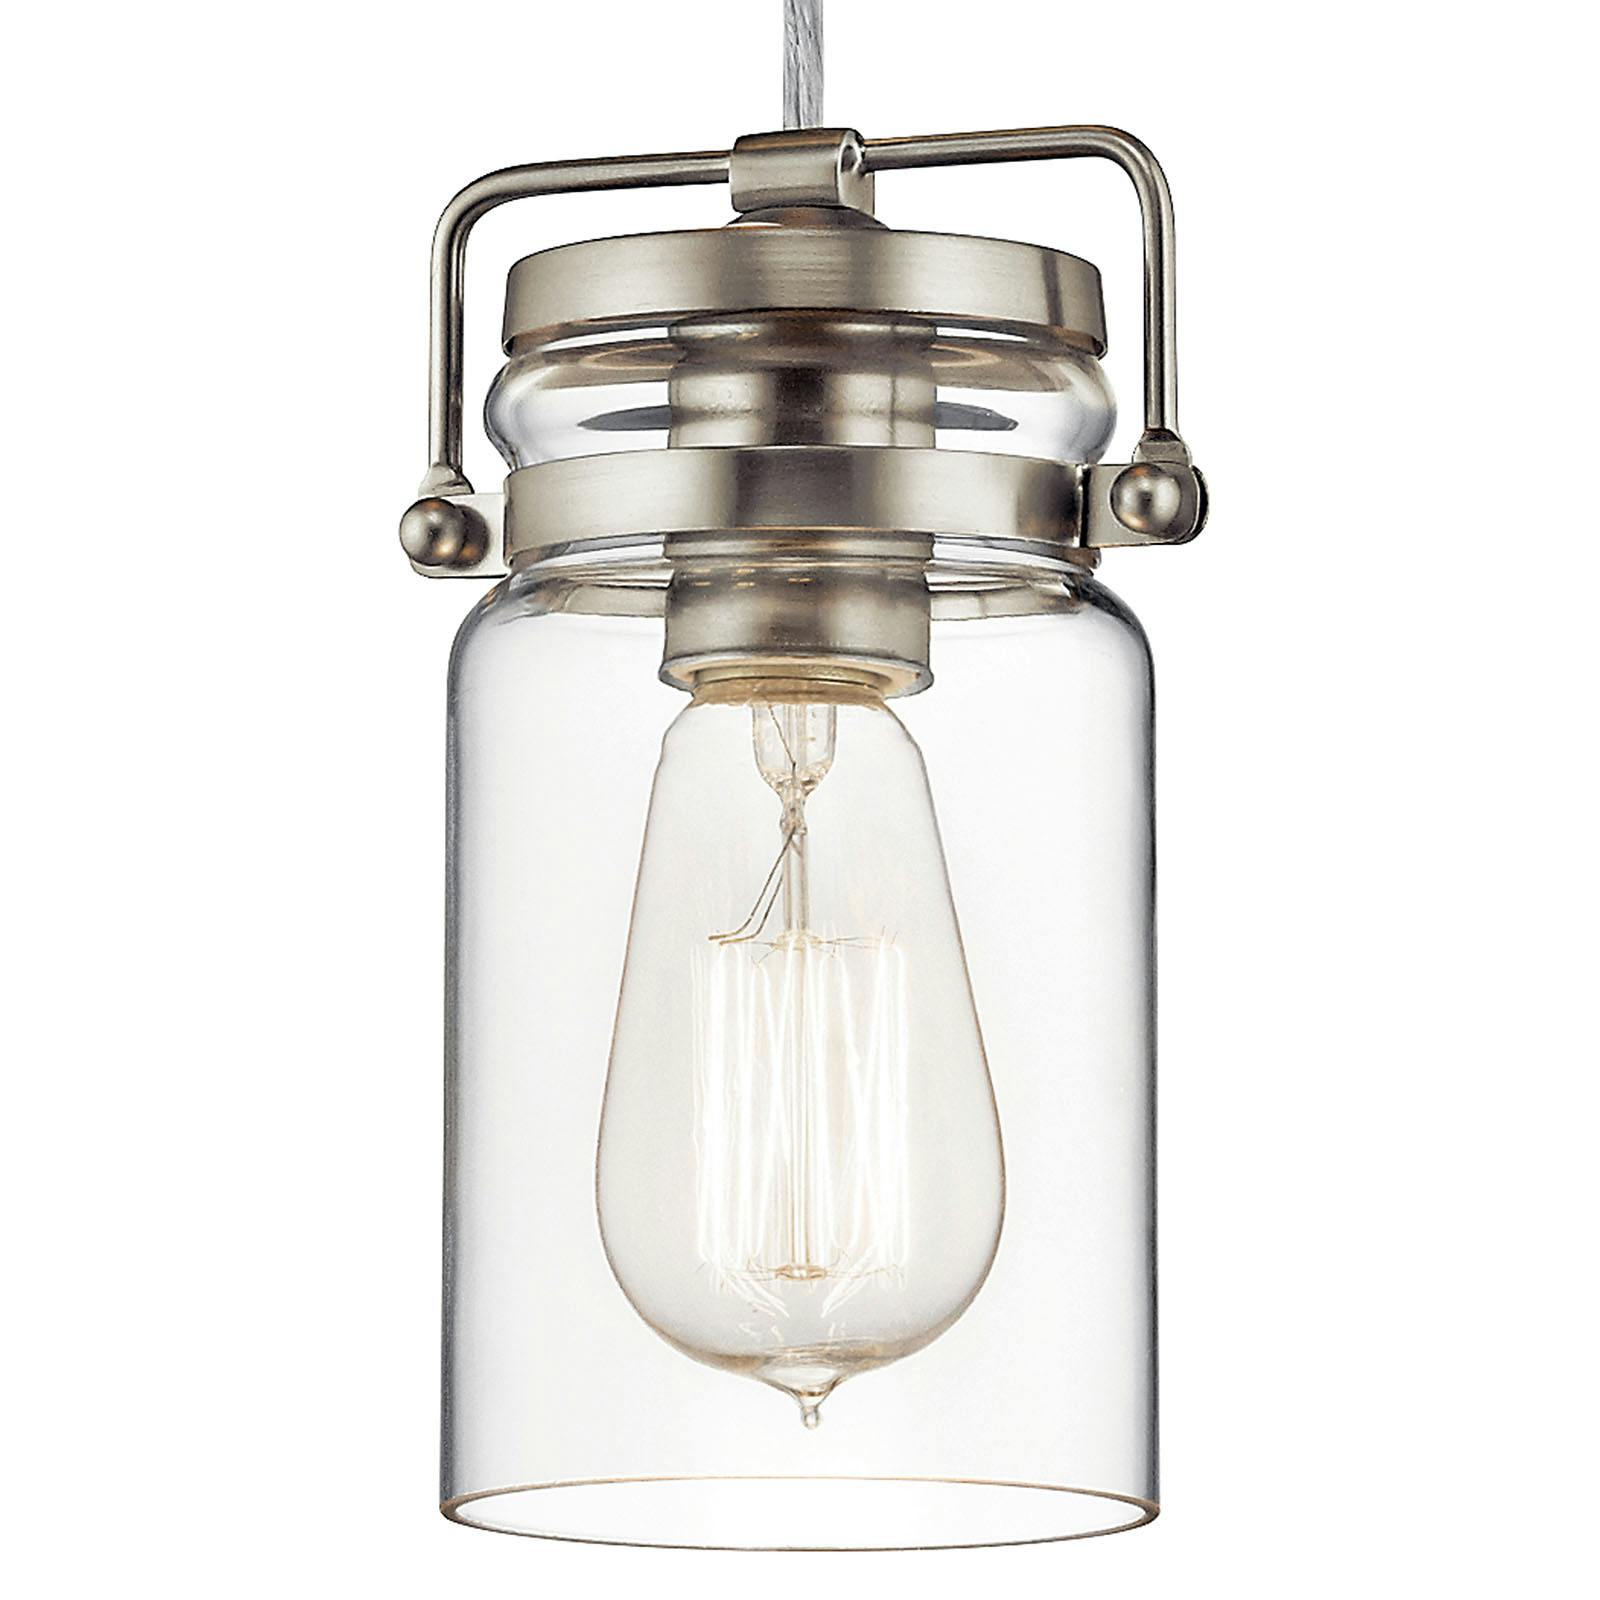 Close up view of the Brinley 7.75" Mini Pendant Nickel on a white background